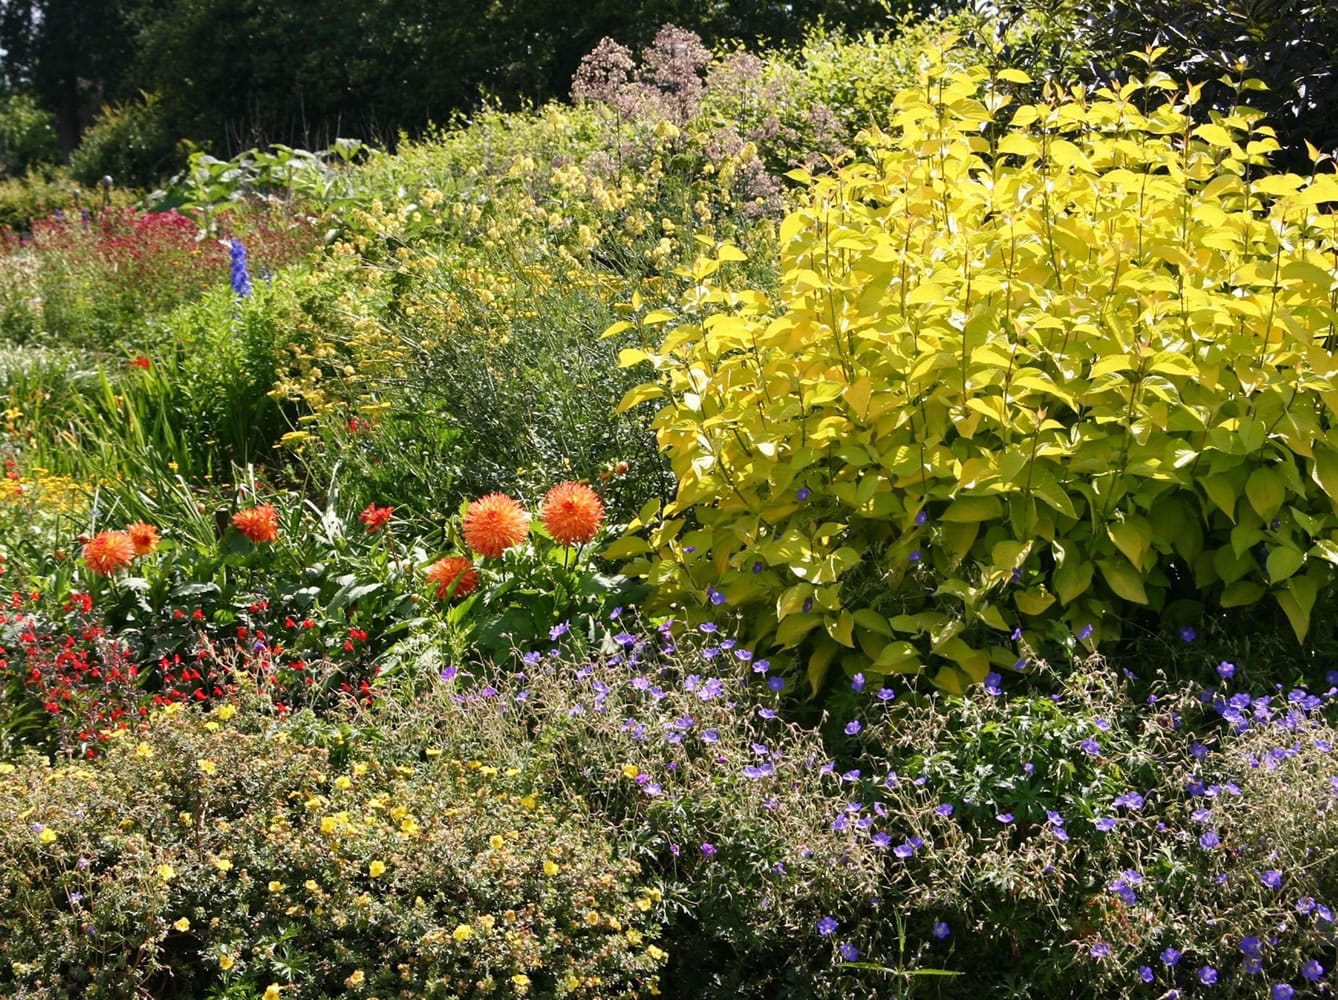 There is always work to do and deadheading is one necessary chore for a productive and tidy garden.